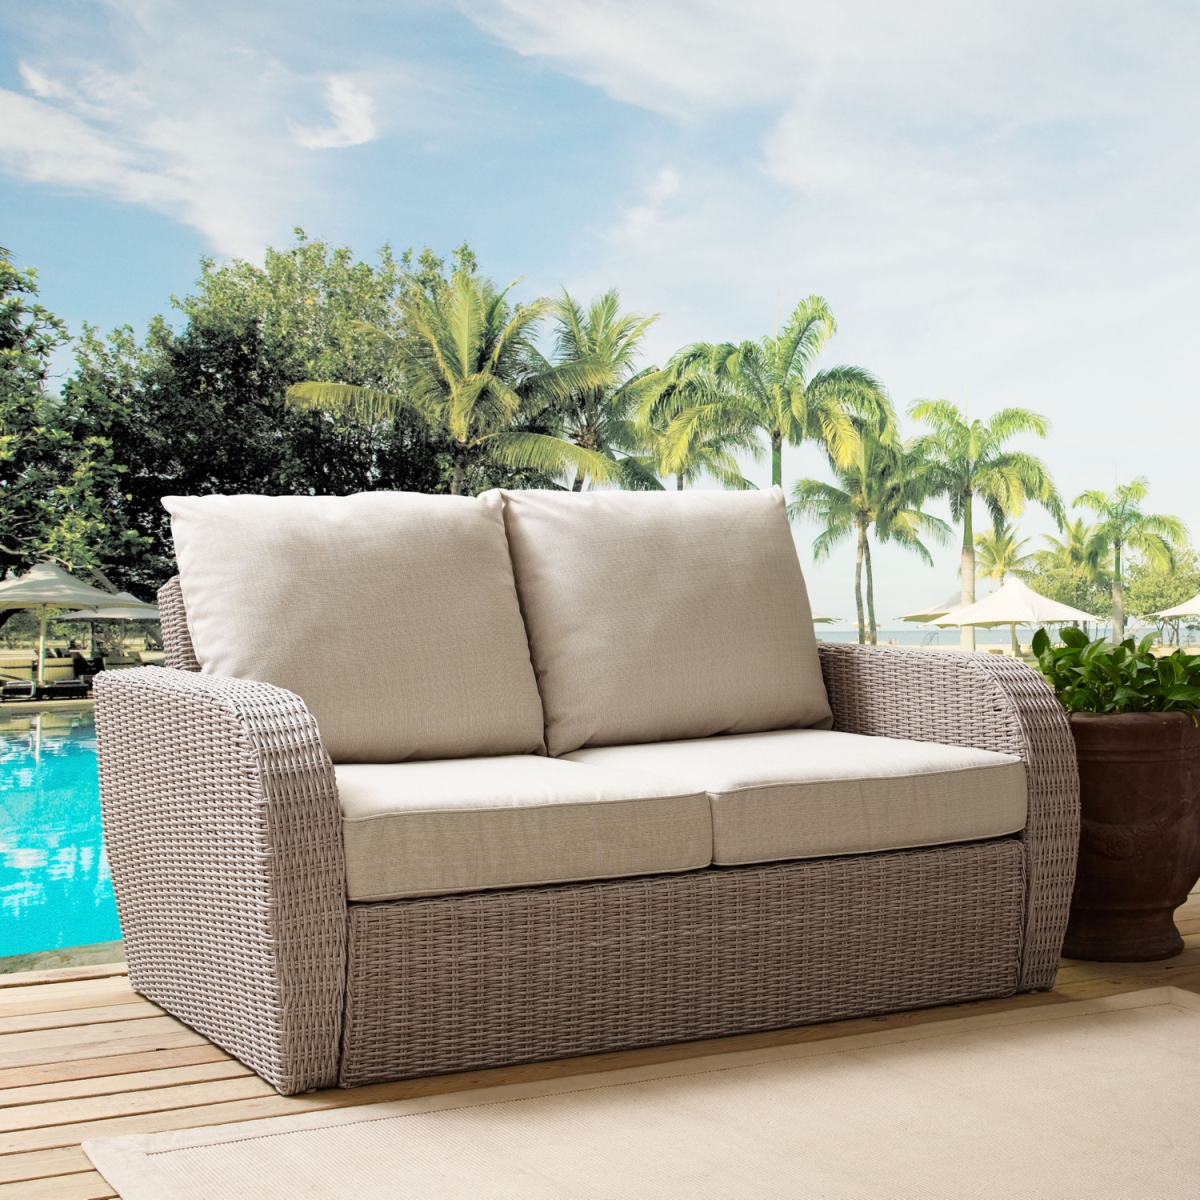 Ko70142wh-ol St. Augustine Outdoor Wicker Loveseat, Weathered White With Universal Oatmeal Cushion